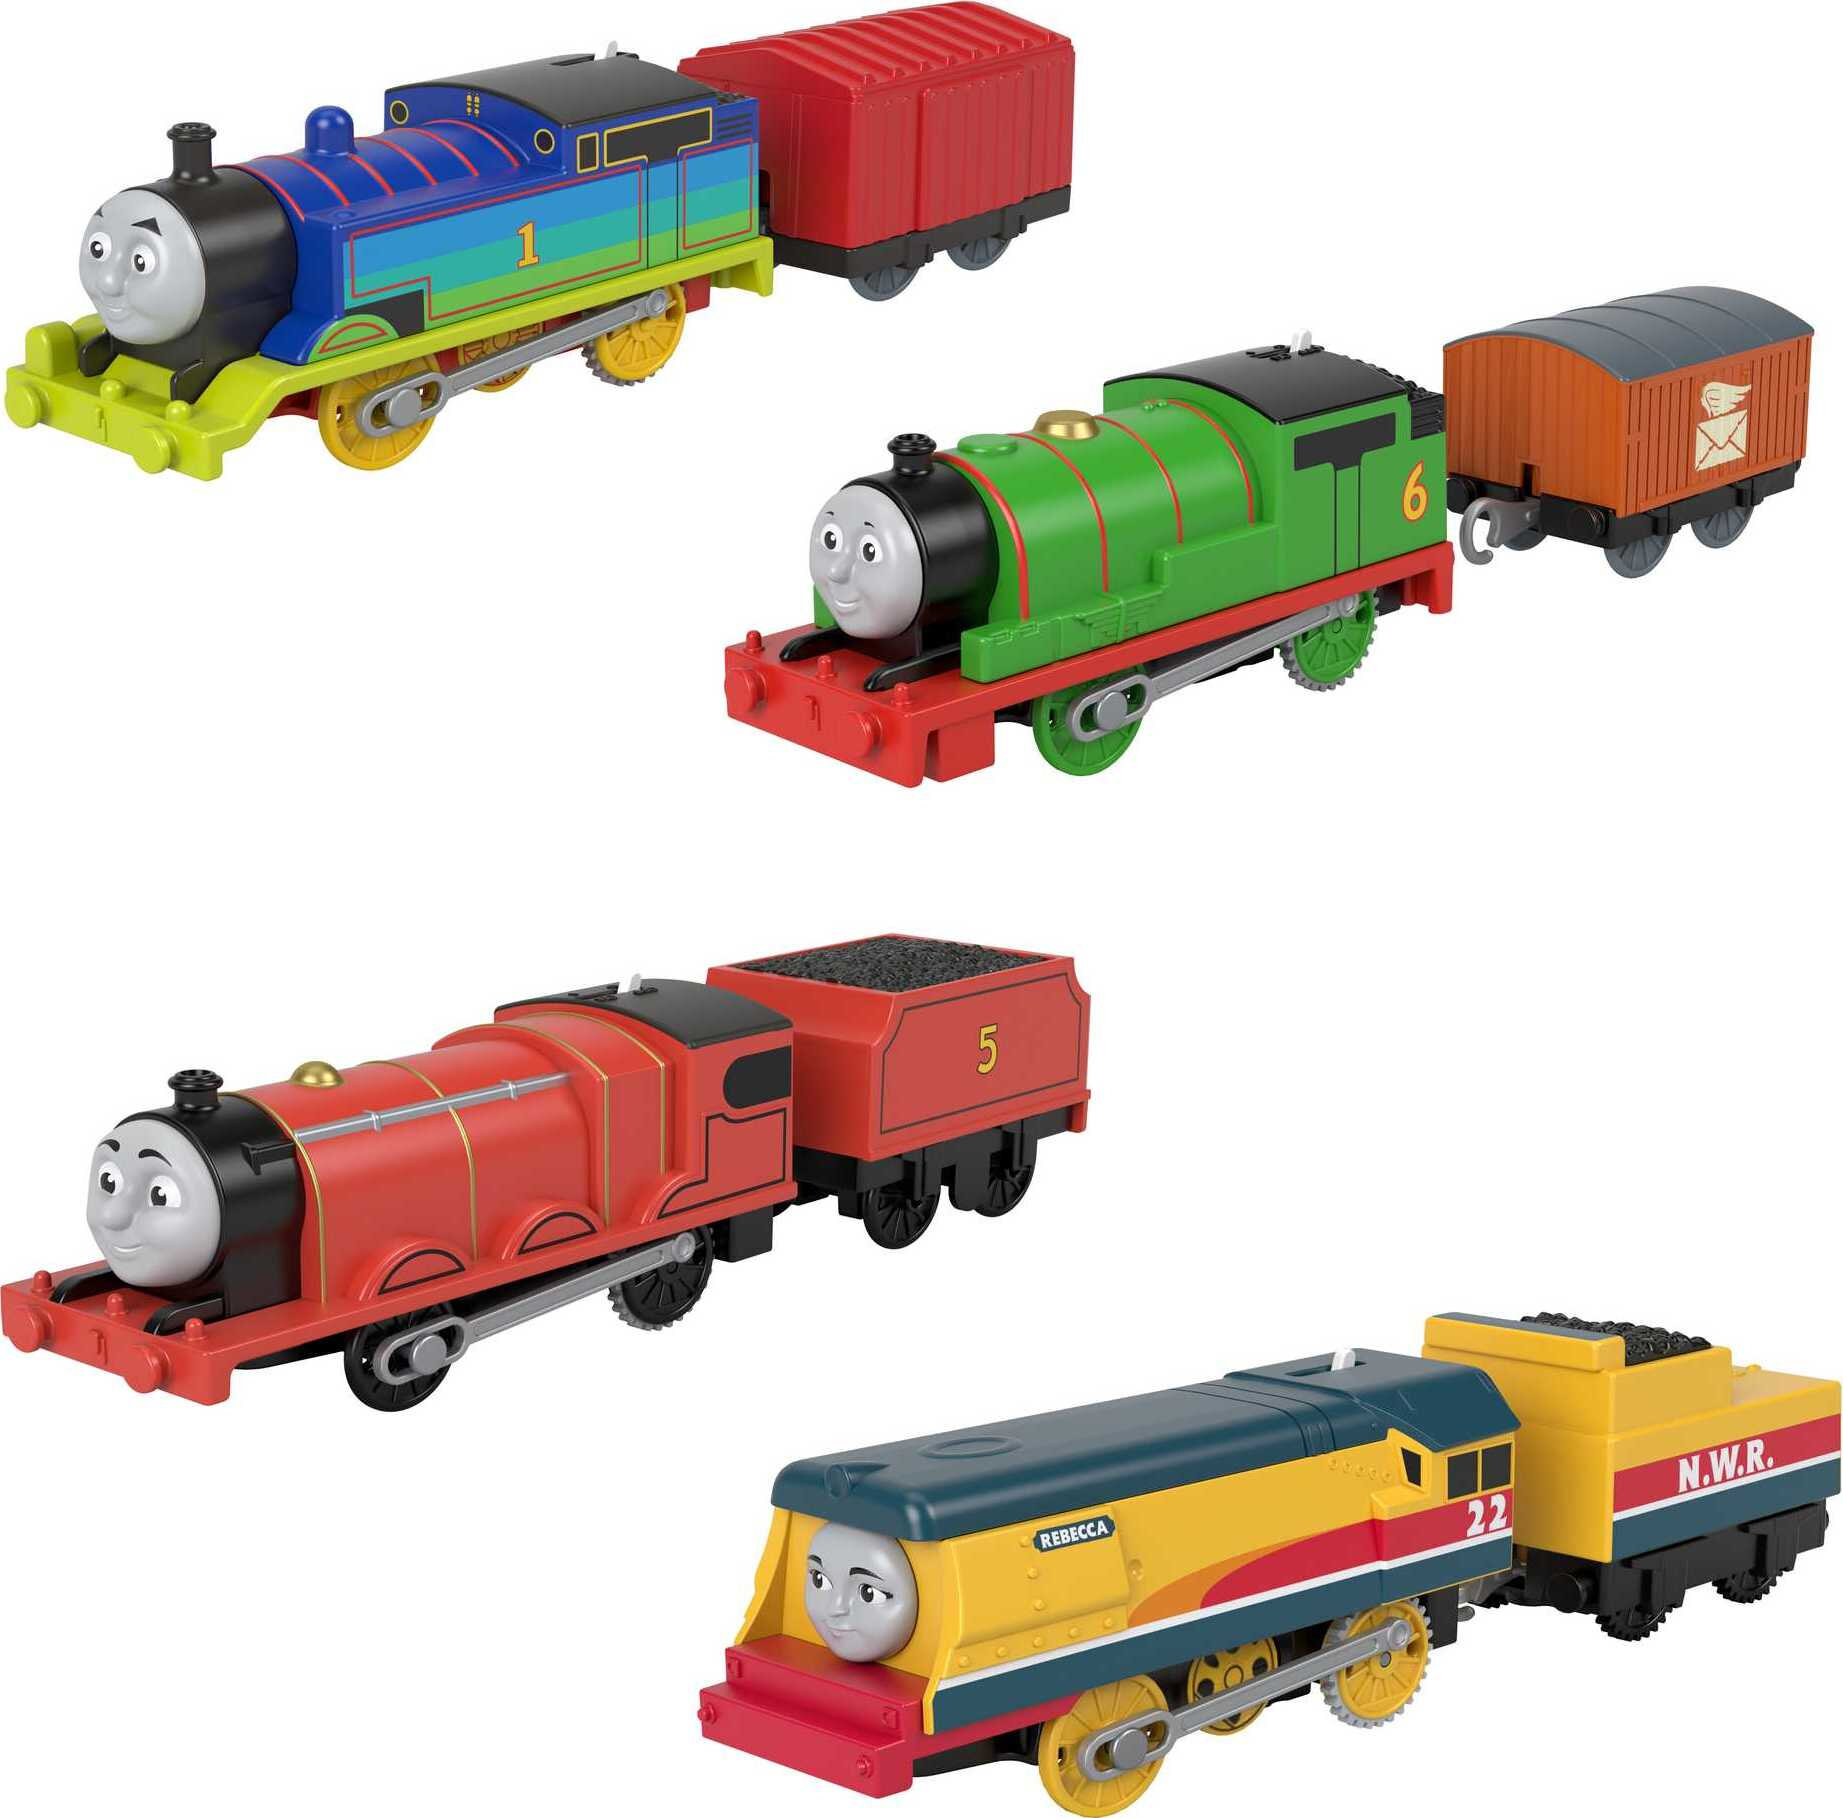 Thomas & Friends Thomas, Percy, James & Rebecca Motorized Toy Train Play Vehicle Pack, 4 Engines - image 1 of 6